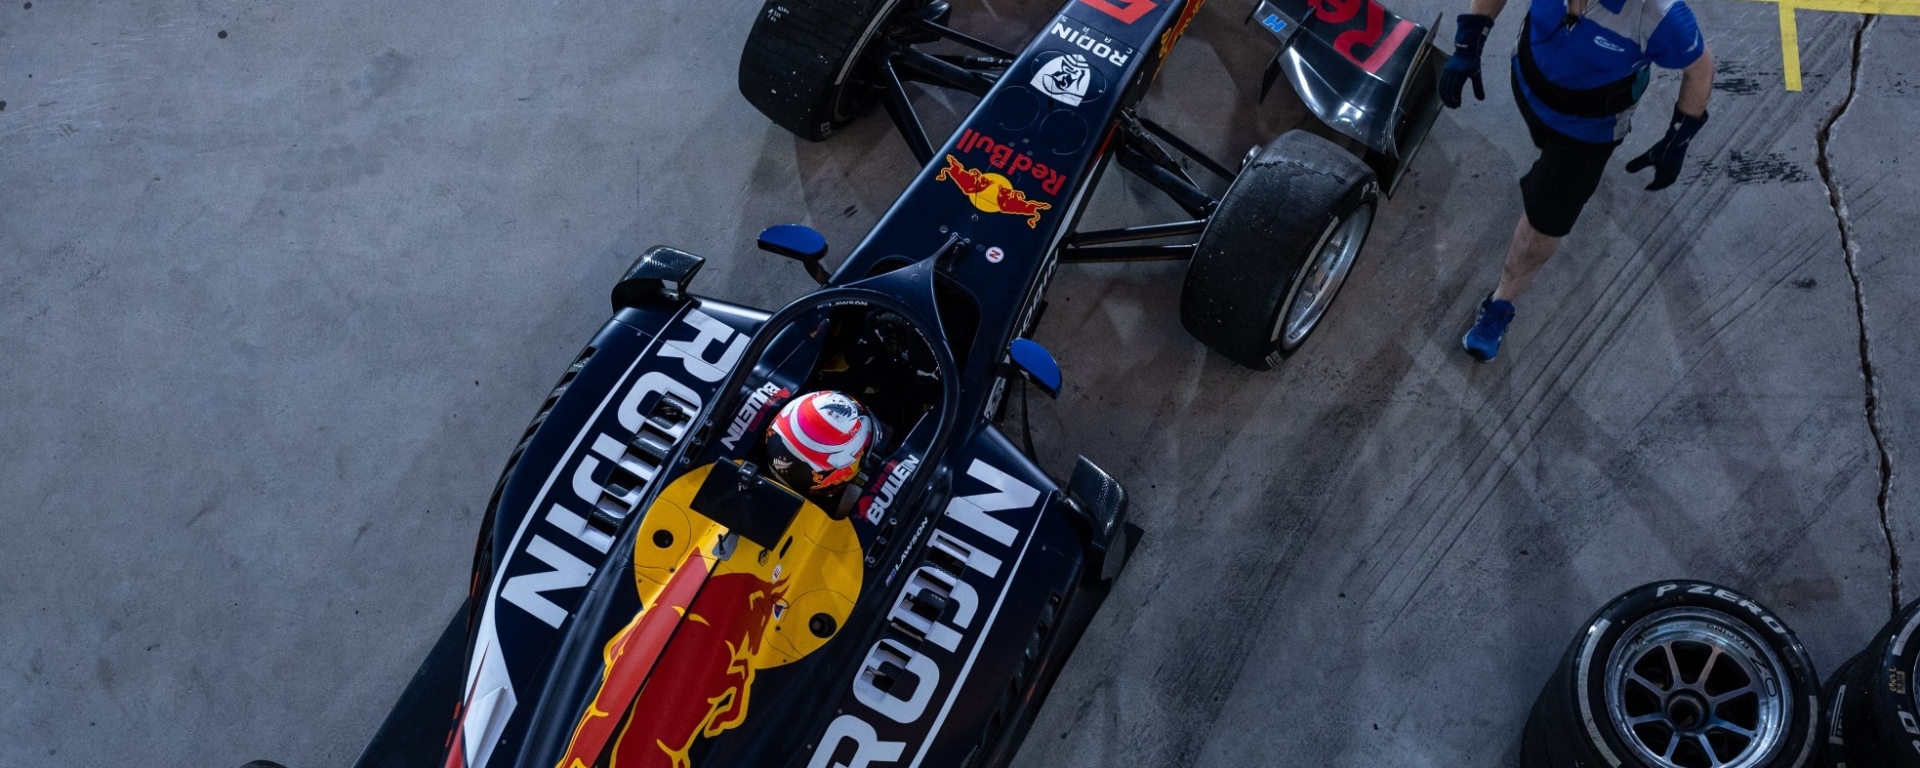 Top-down view of dark blue car with Rodin and Red Bull sponsorships on it.